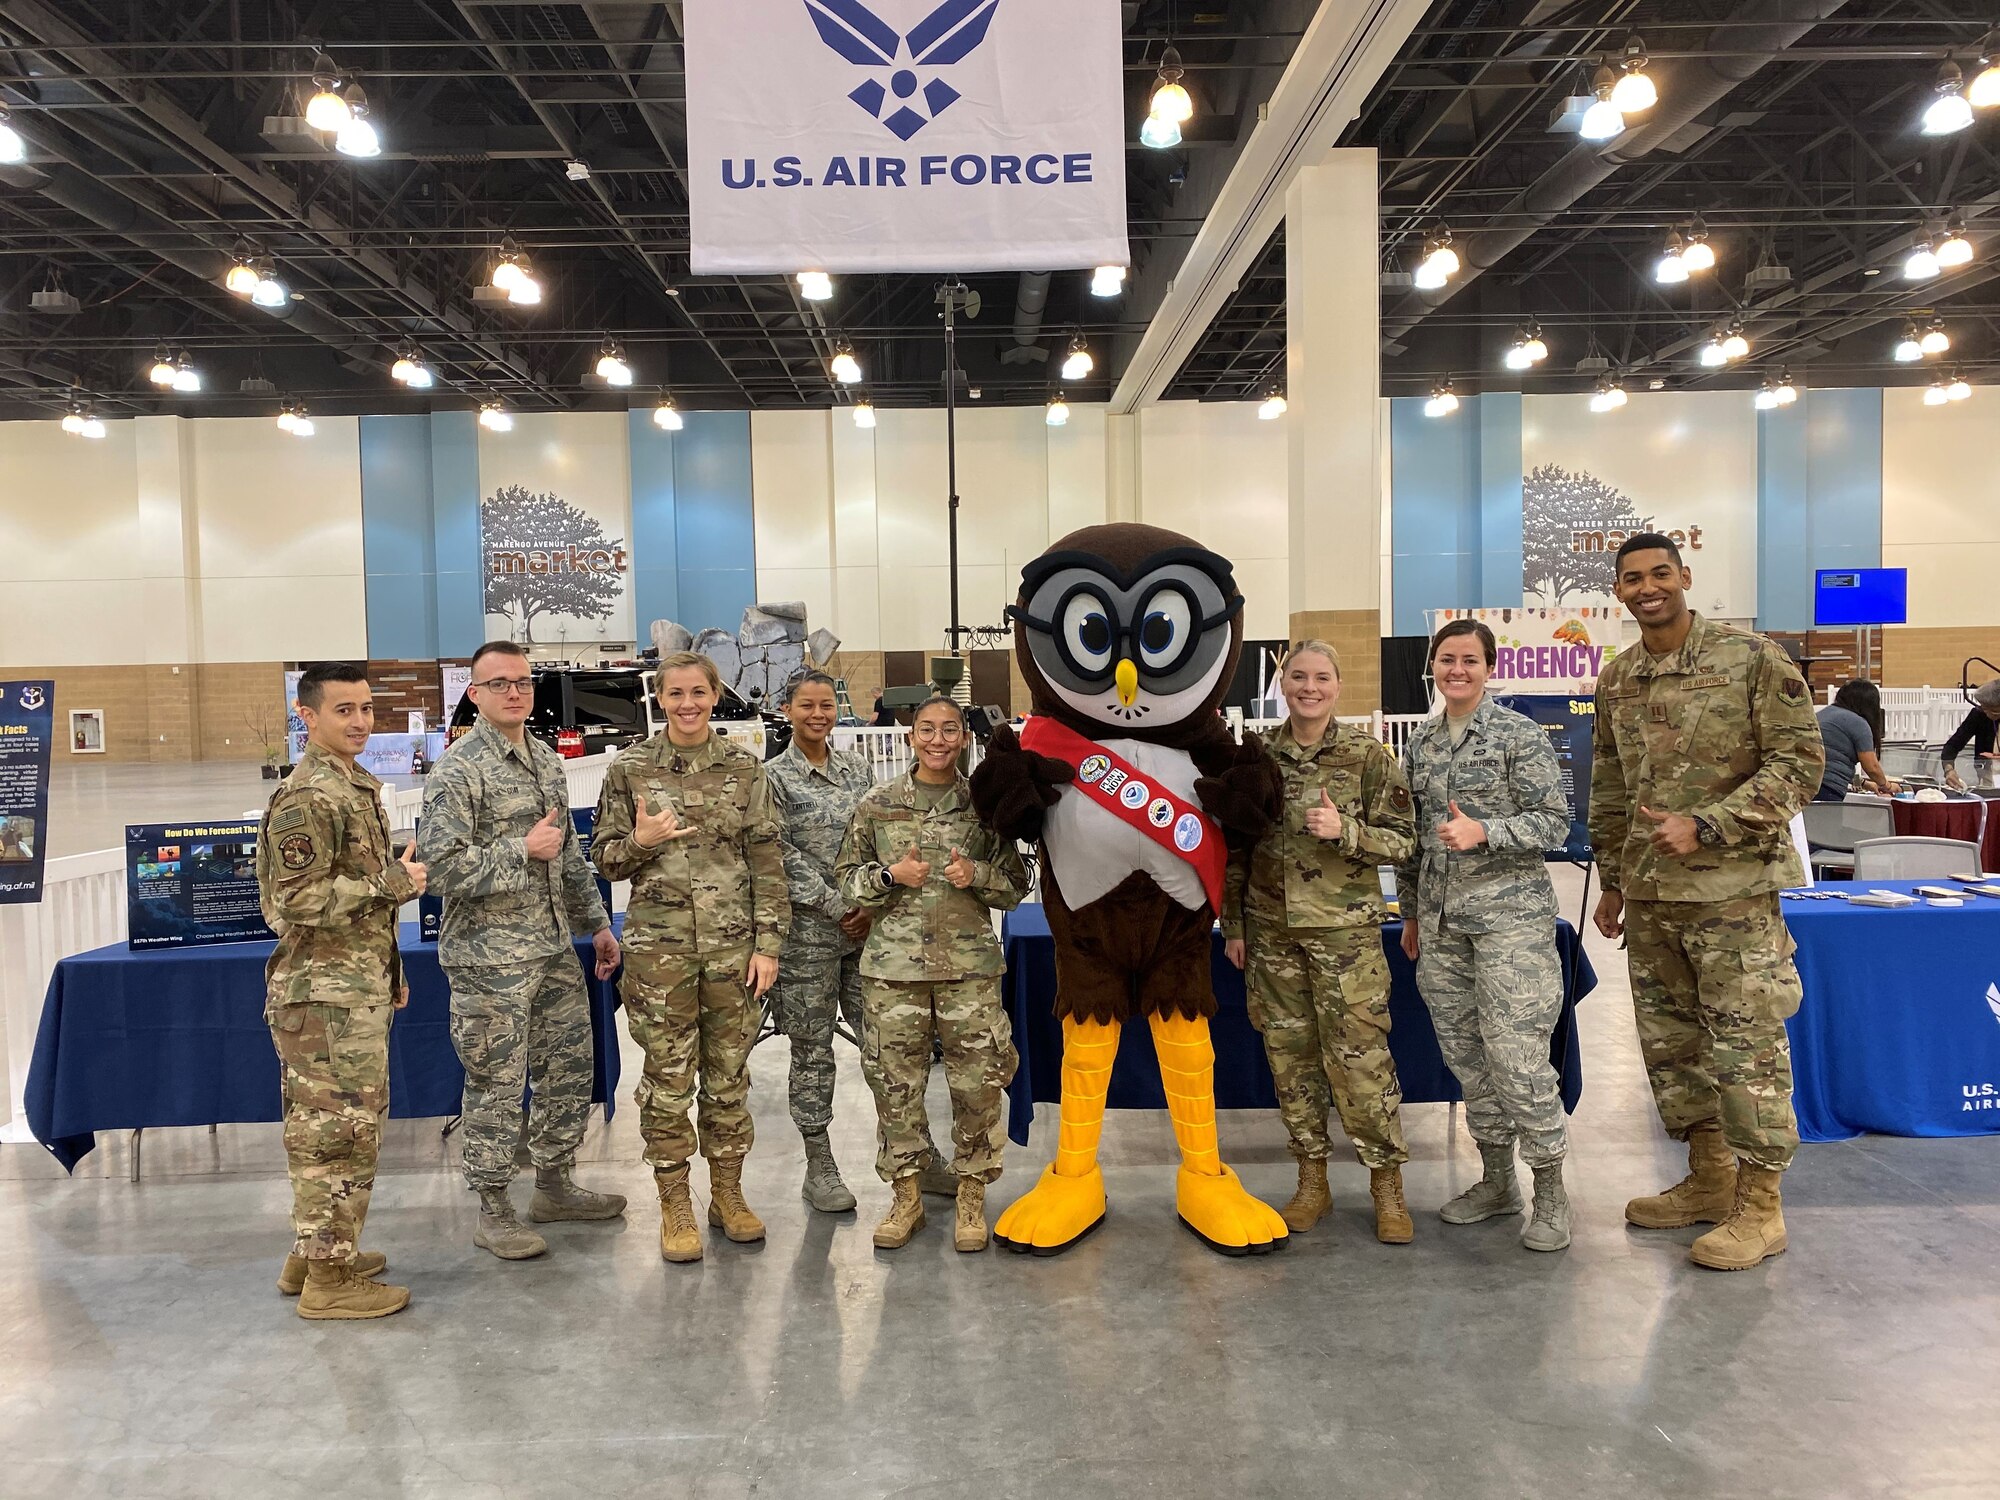 Airmen posing with mascot for group photo.